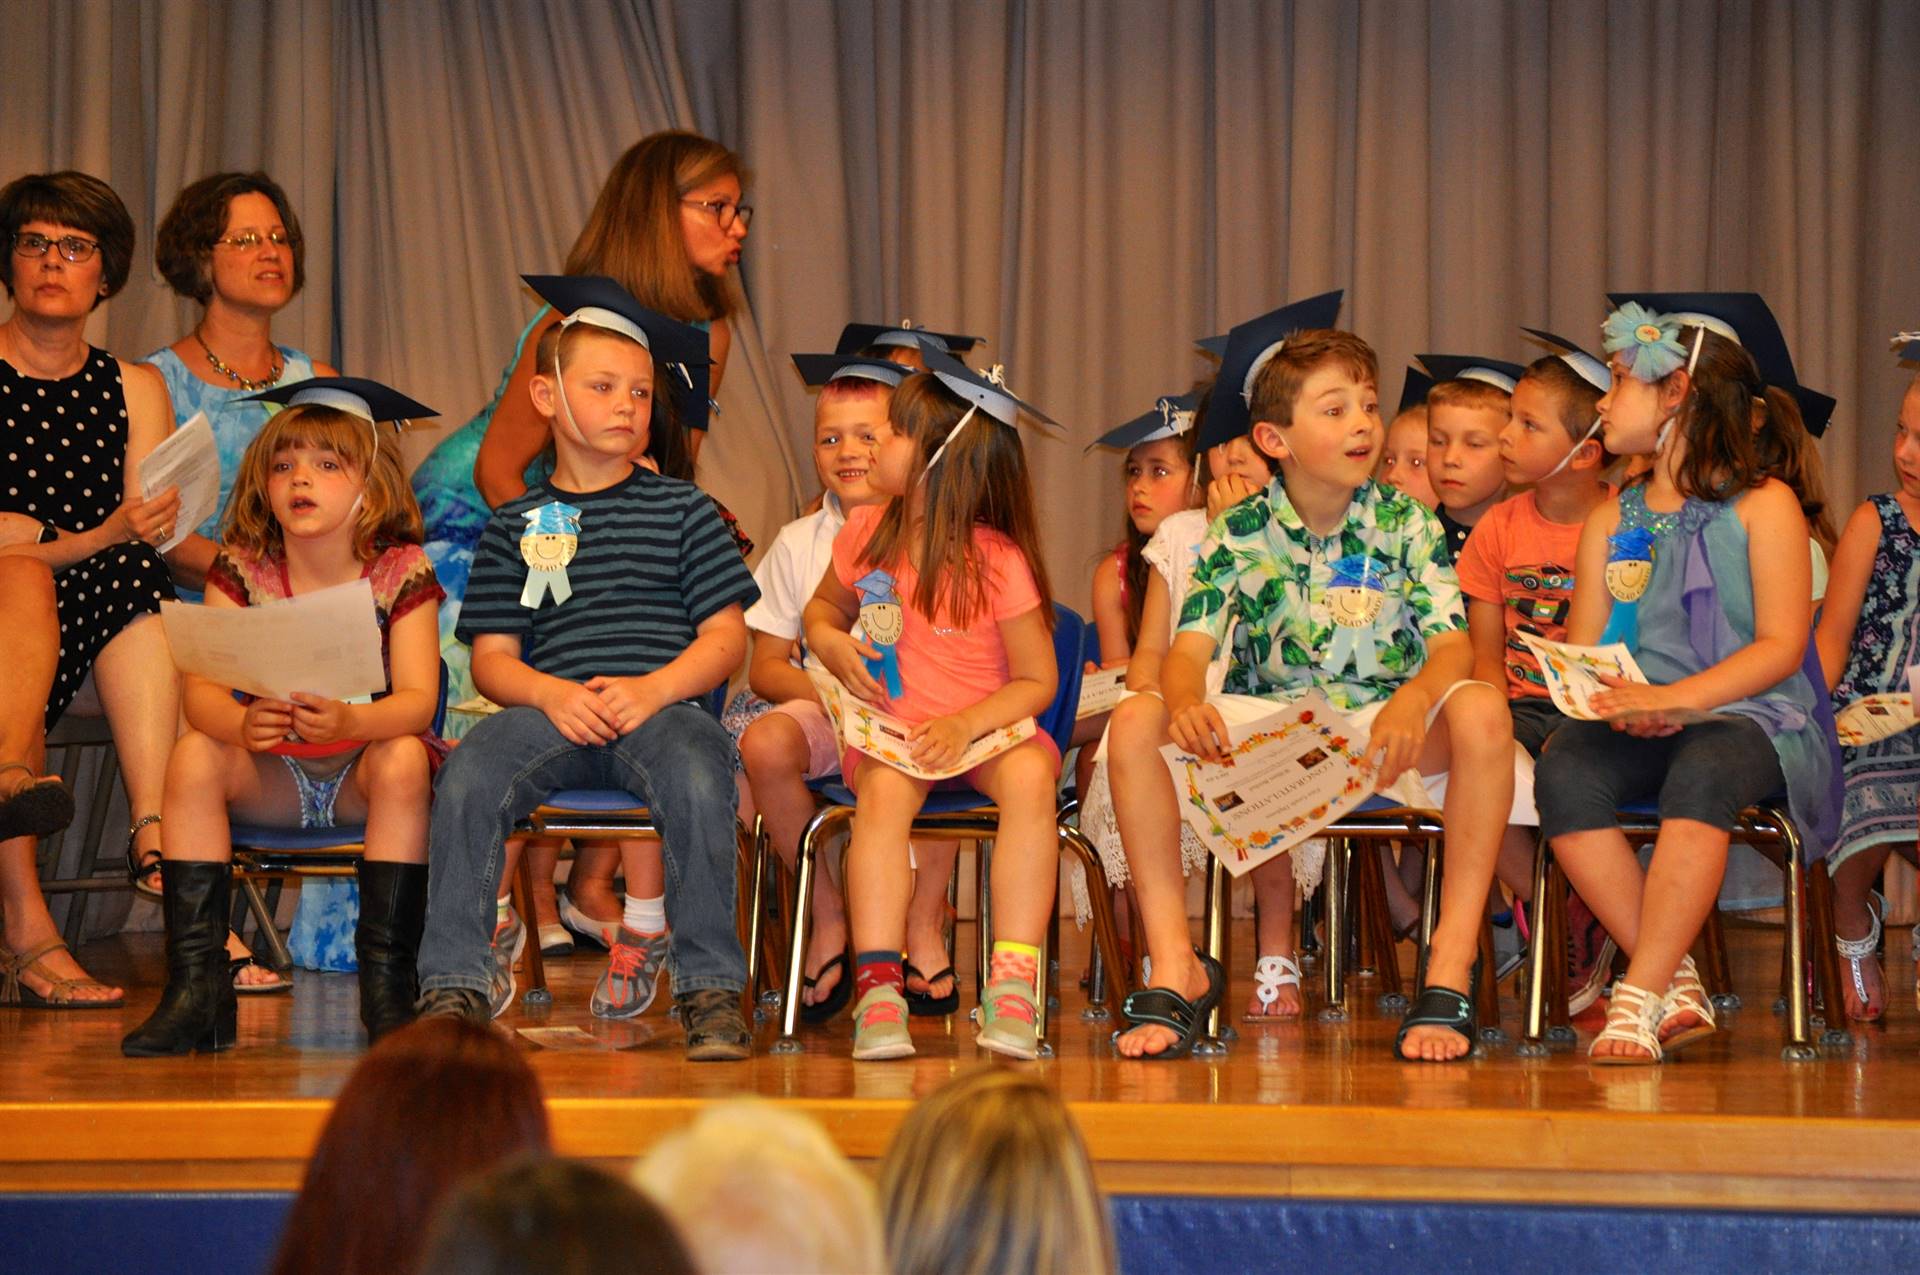 First graders admire their certificates of graduation on stage!